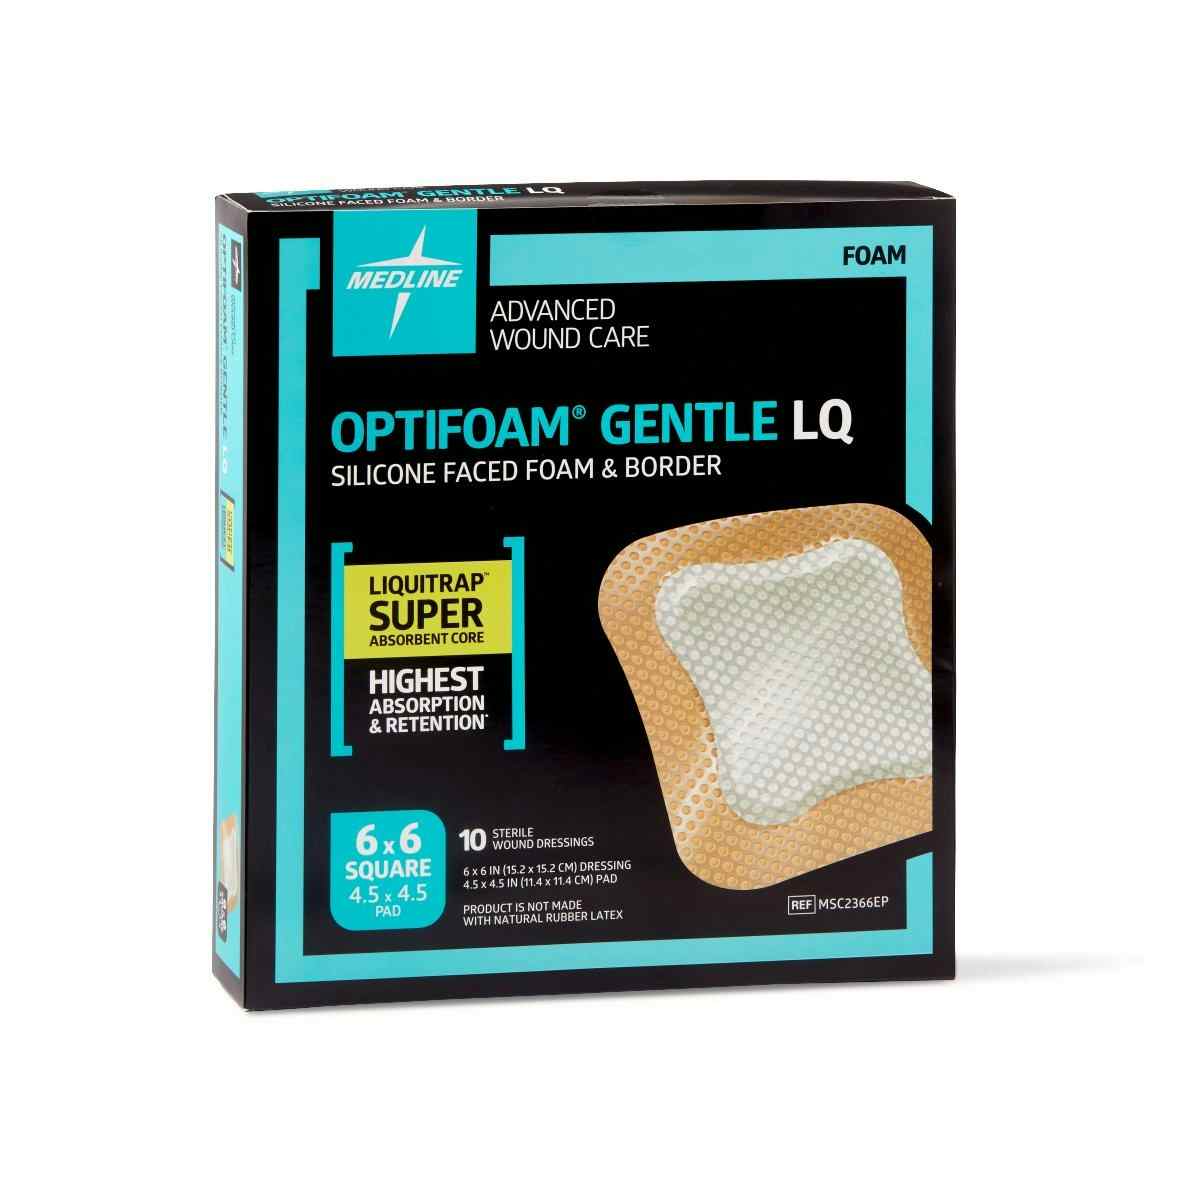 Optifoam Gentle LQ Silicone-Faced Foam Dressing with Liquitrap, MSC2366EPZ, 6 X 6 Inches - Box of 10